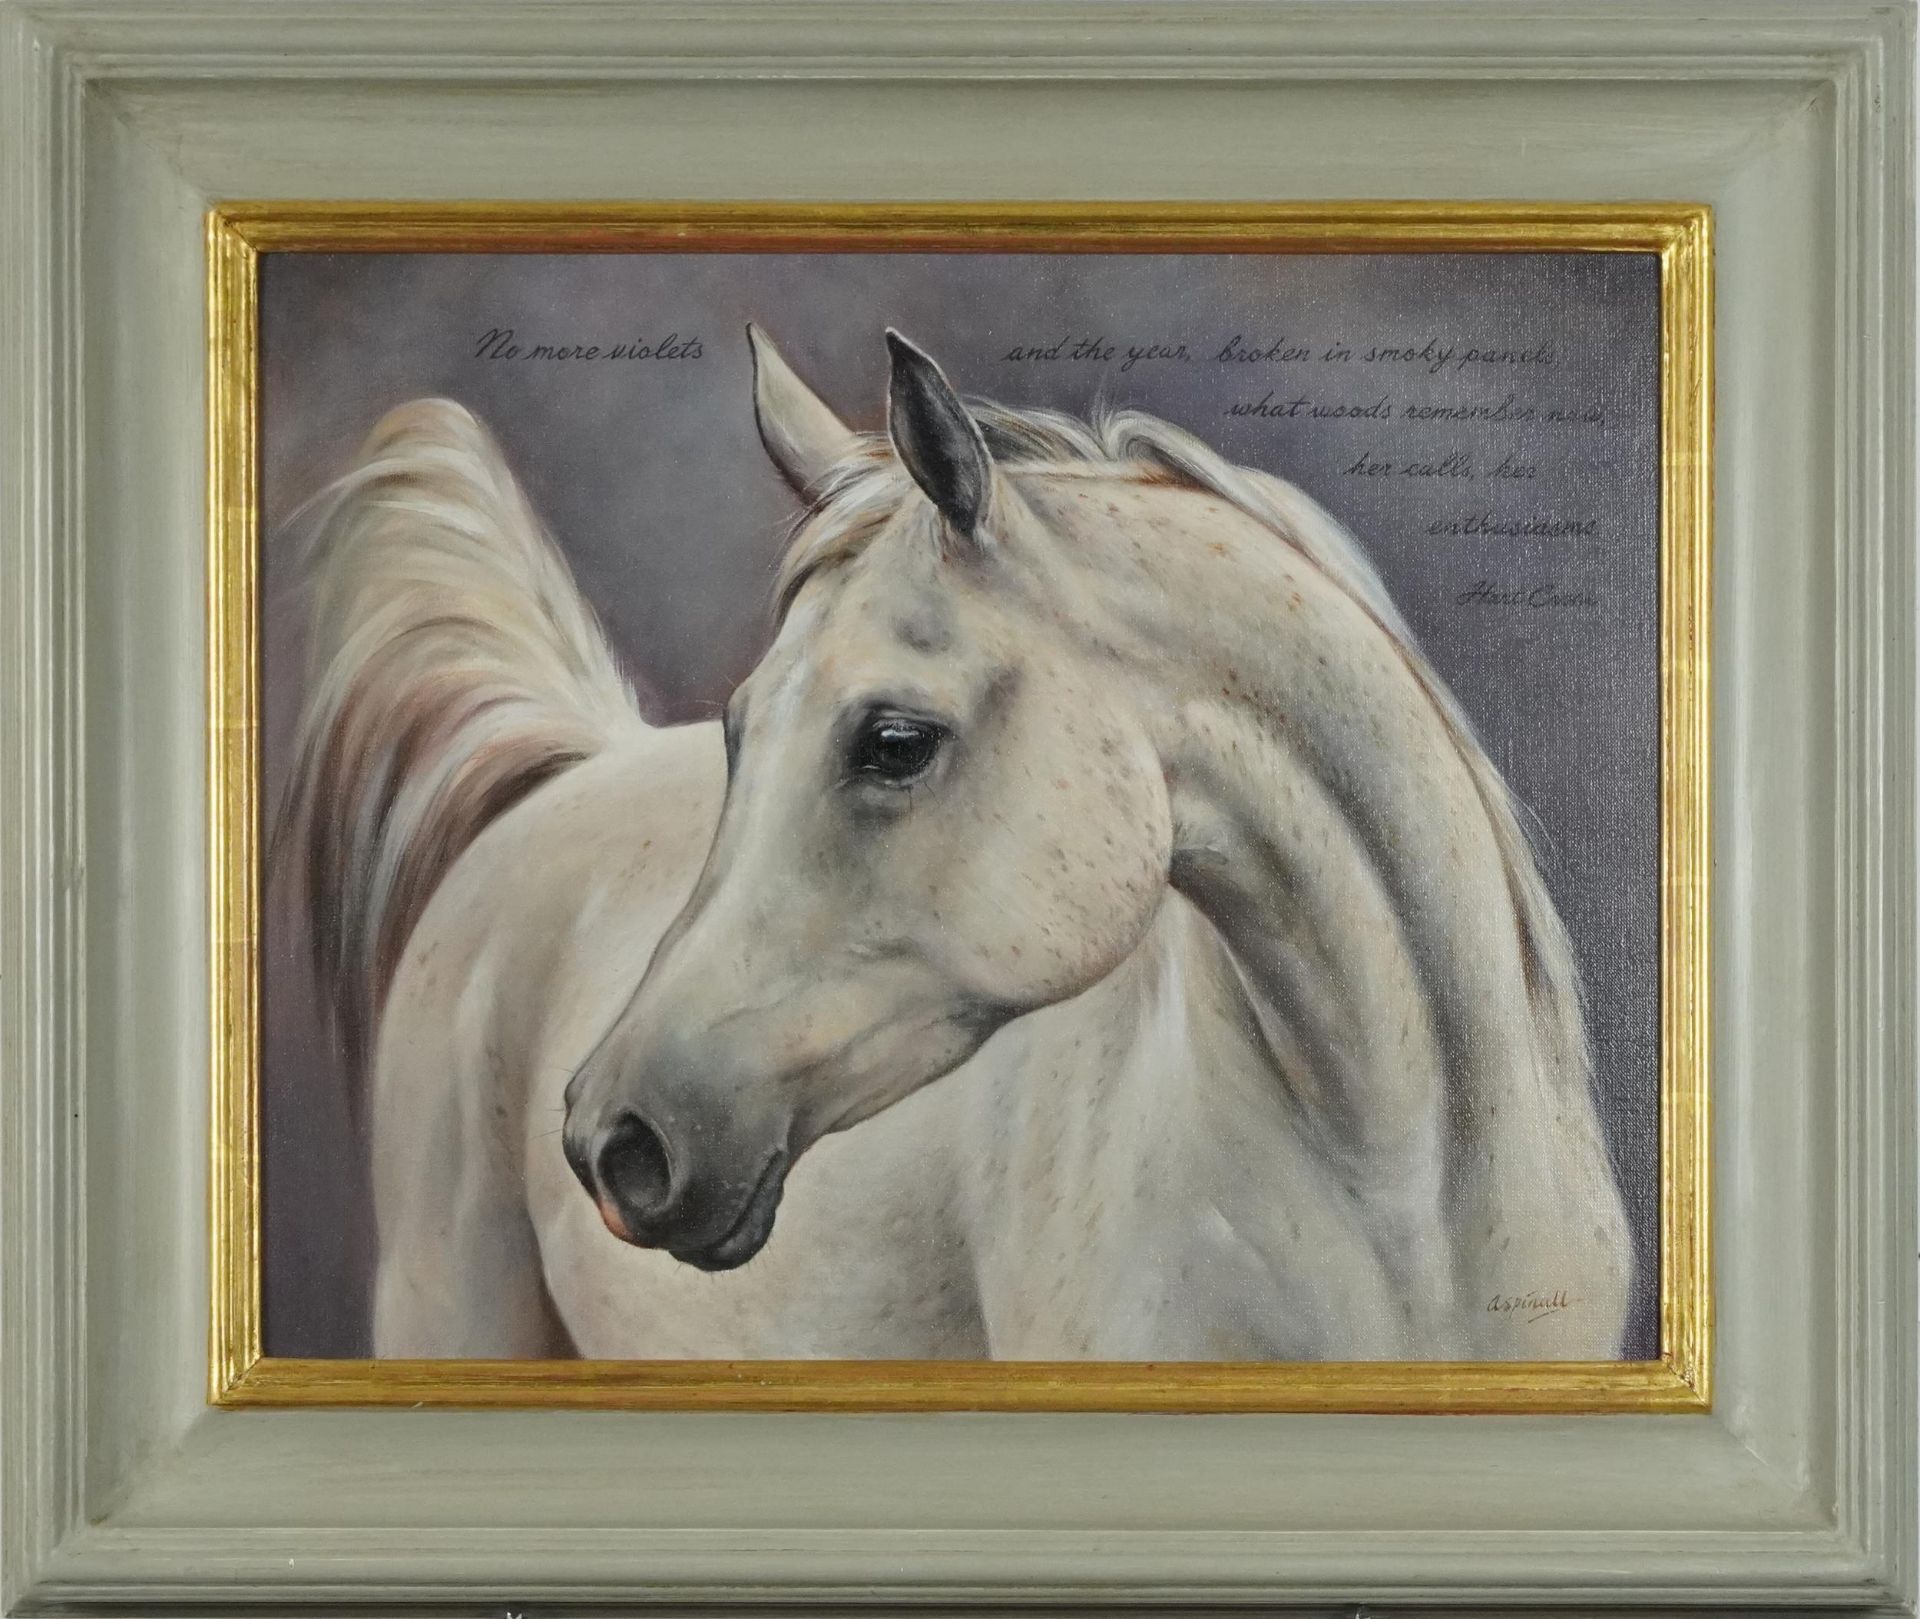 Sarah Aspinall - White horse, equestrian interest oil on canvas, mounted and framed, 48.5cm x 38.5cm - Bild 2 aus 4